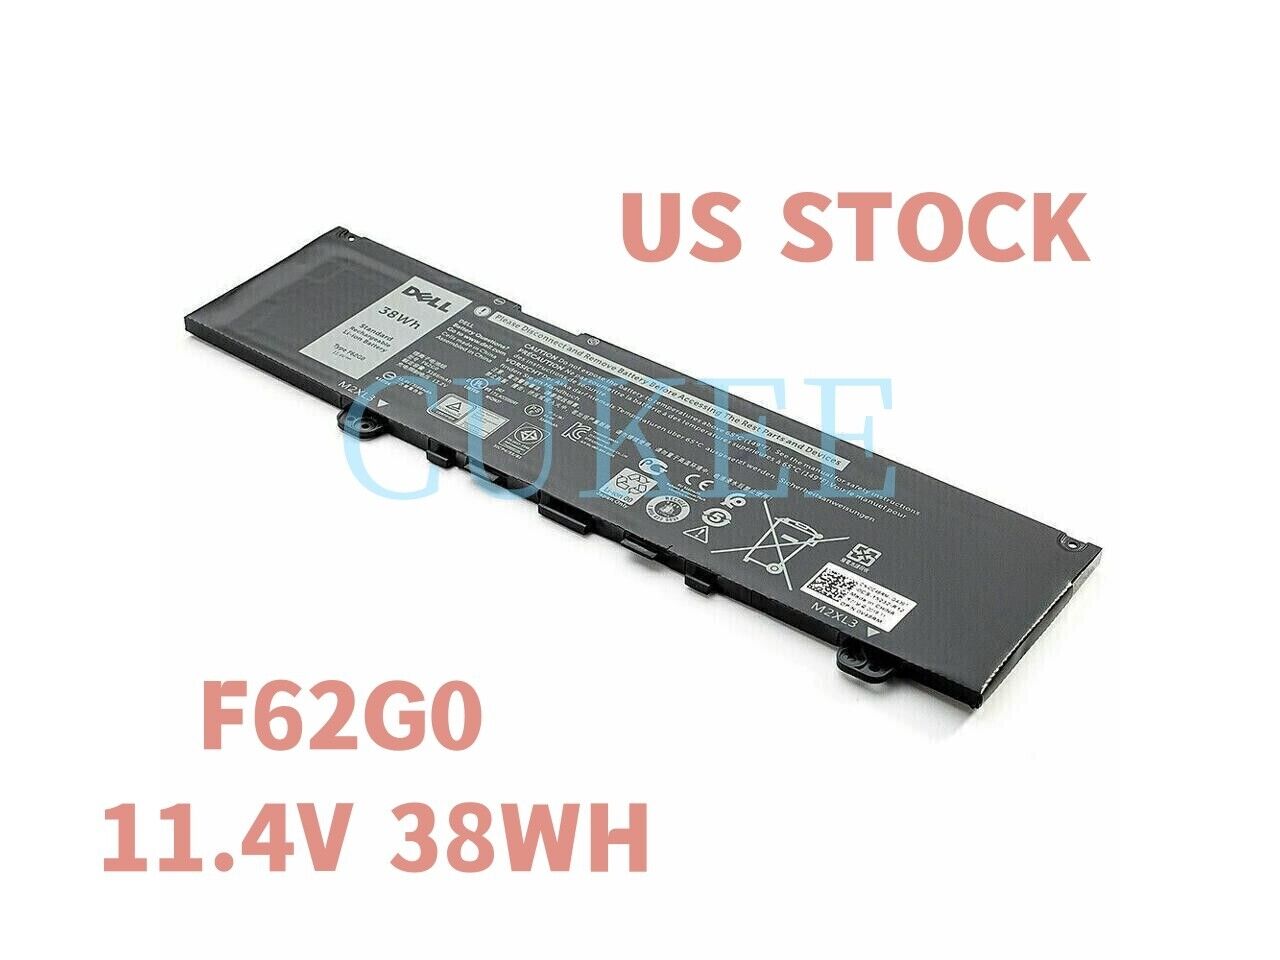 Genuine F62G0 39DY5 Battery Inspiron 5370 7370 7380 13 7000 2-IN-1 7373 039DY5